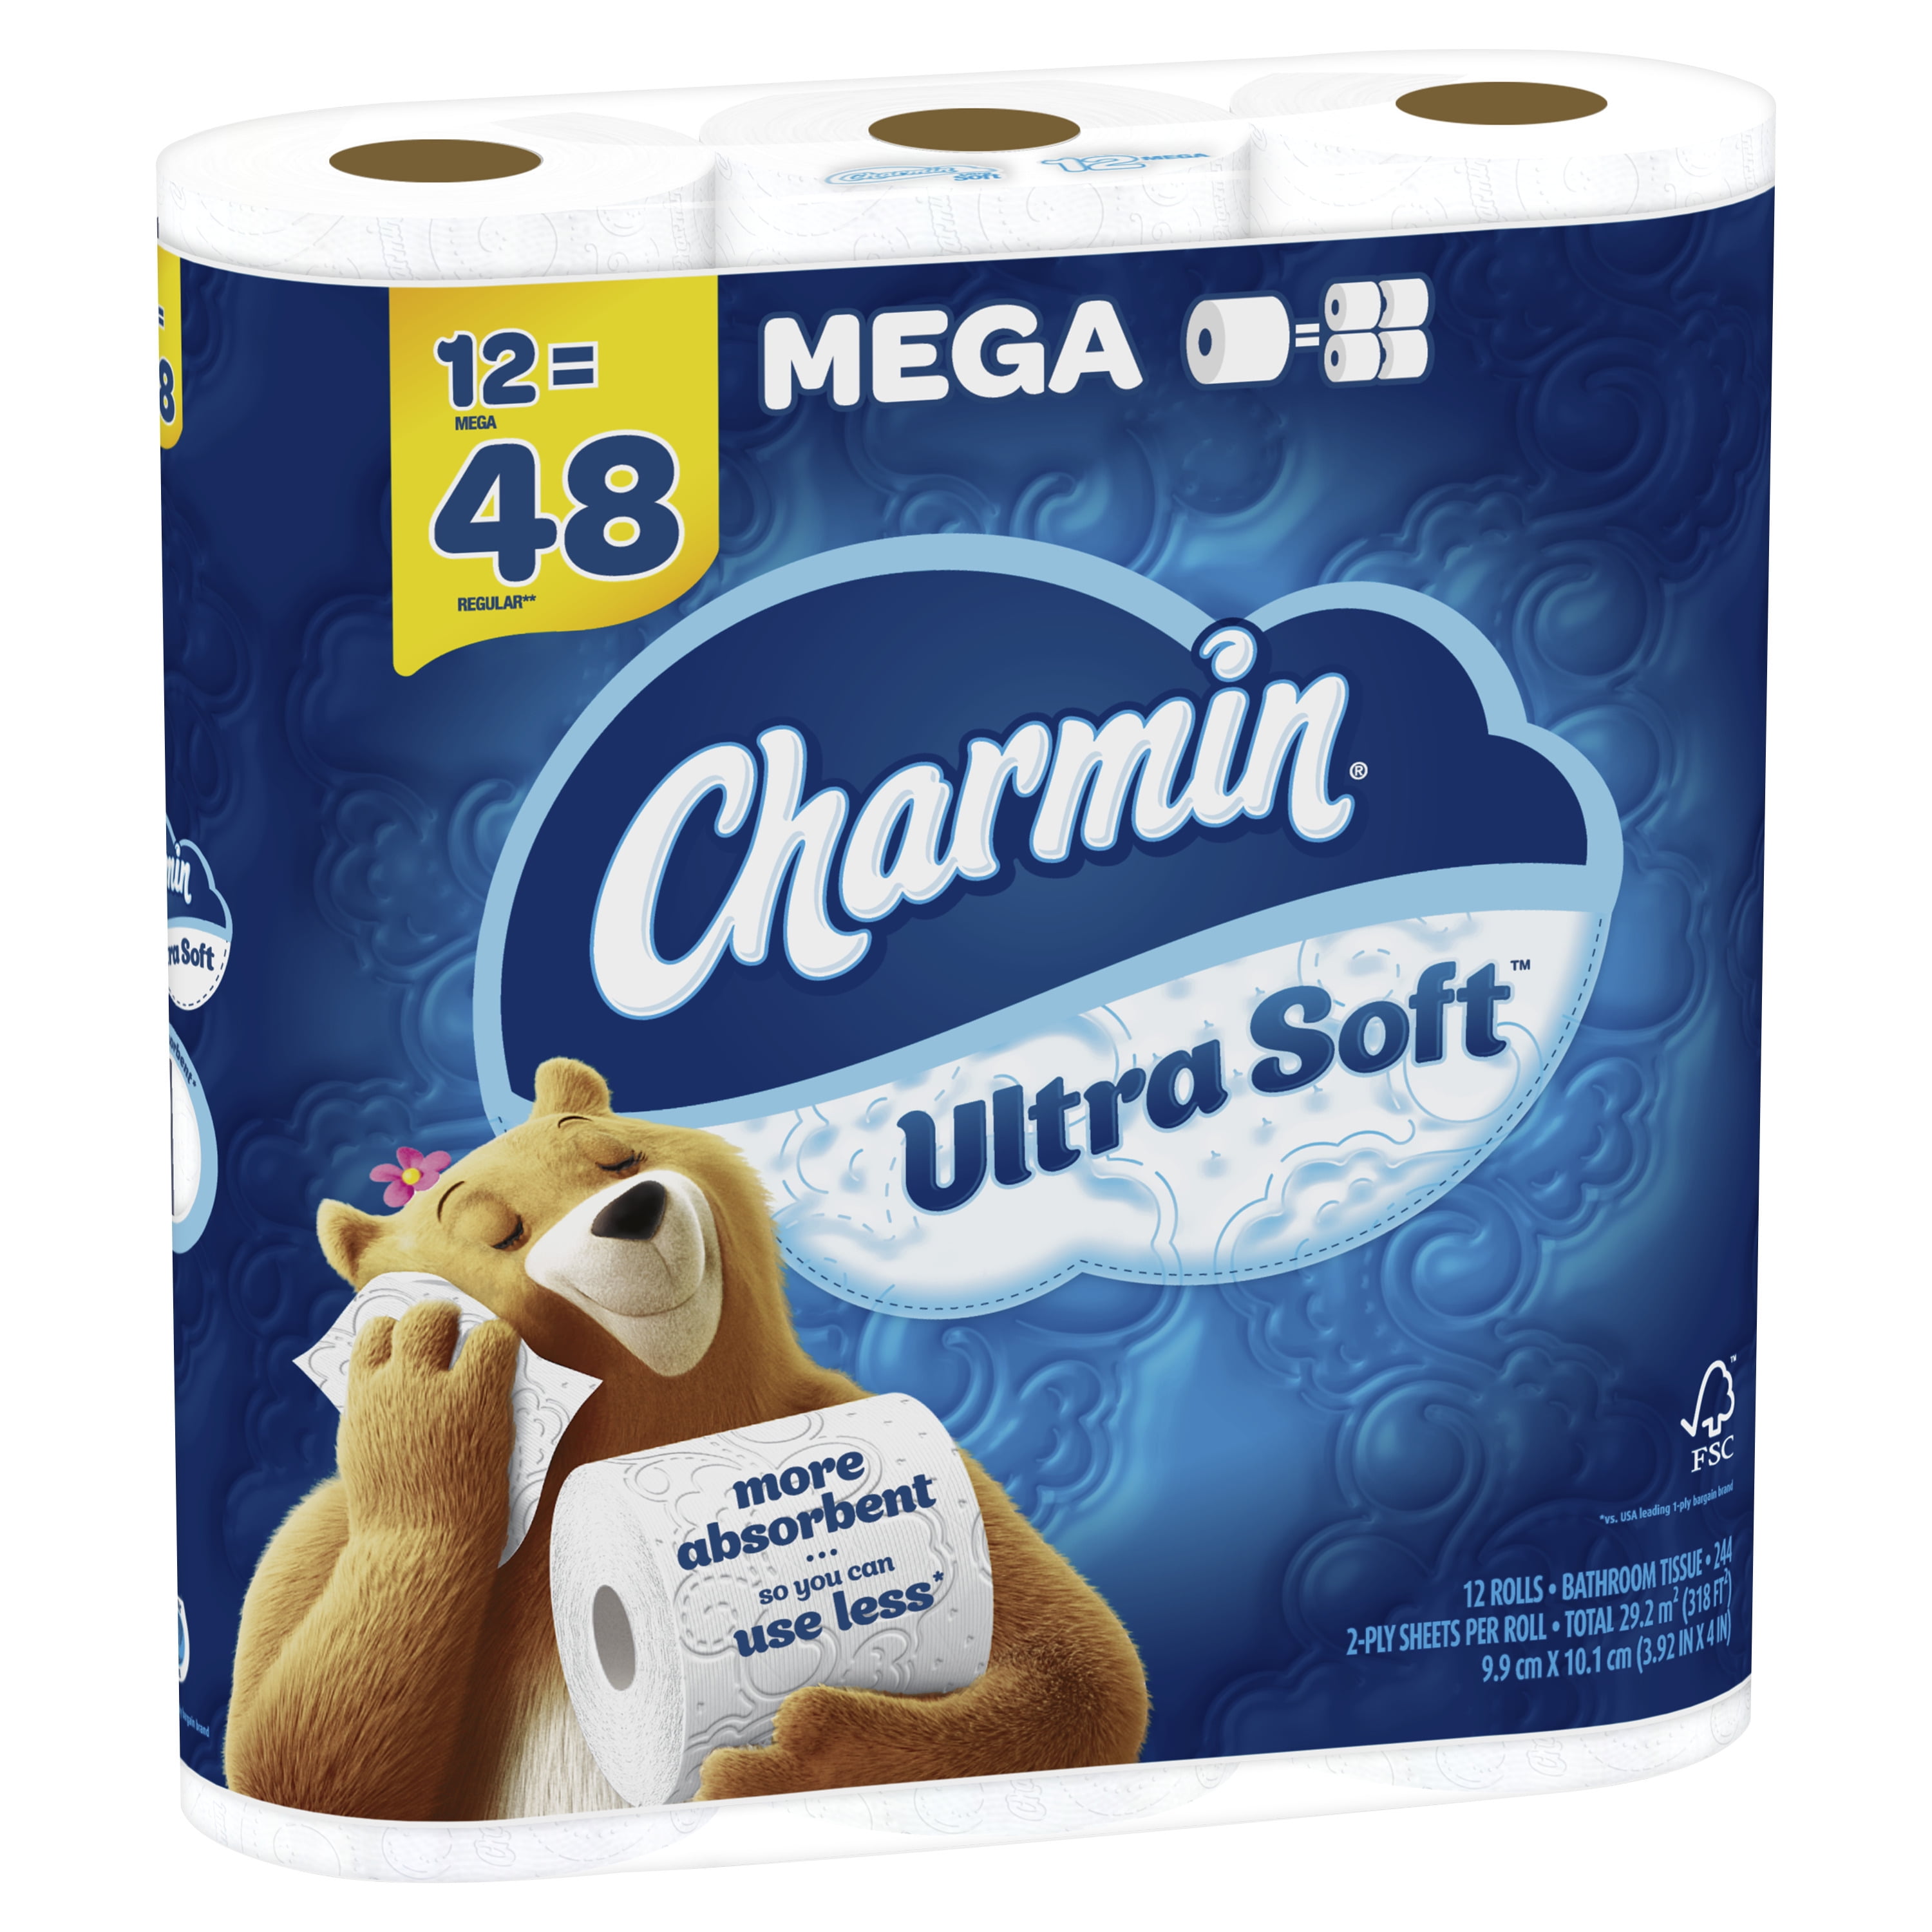 Charmin “family mega” size toilet paper roll is too big for my